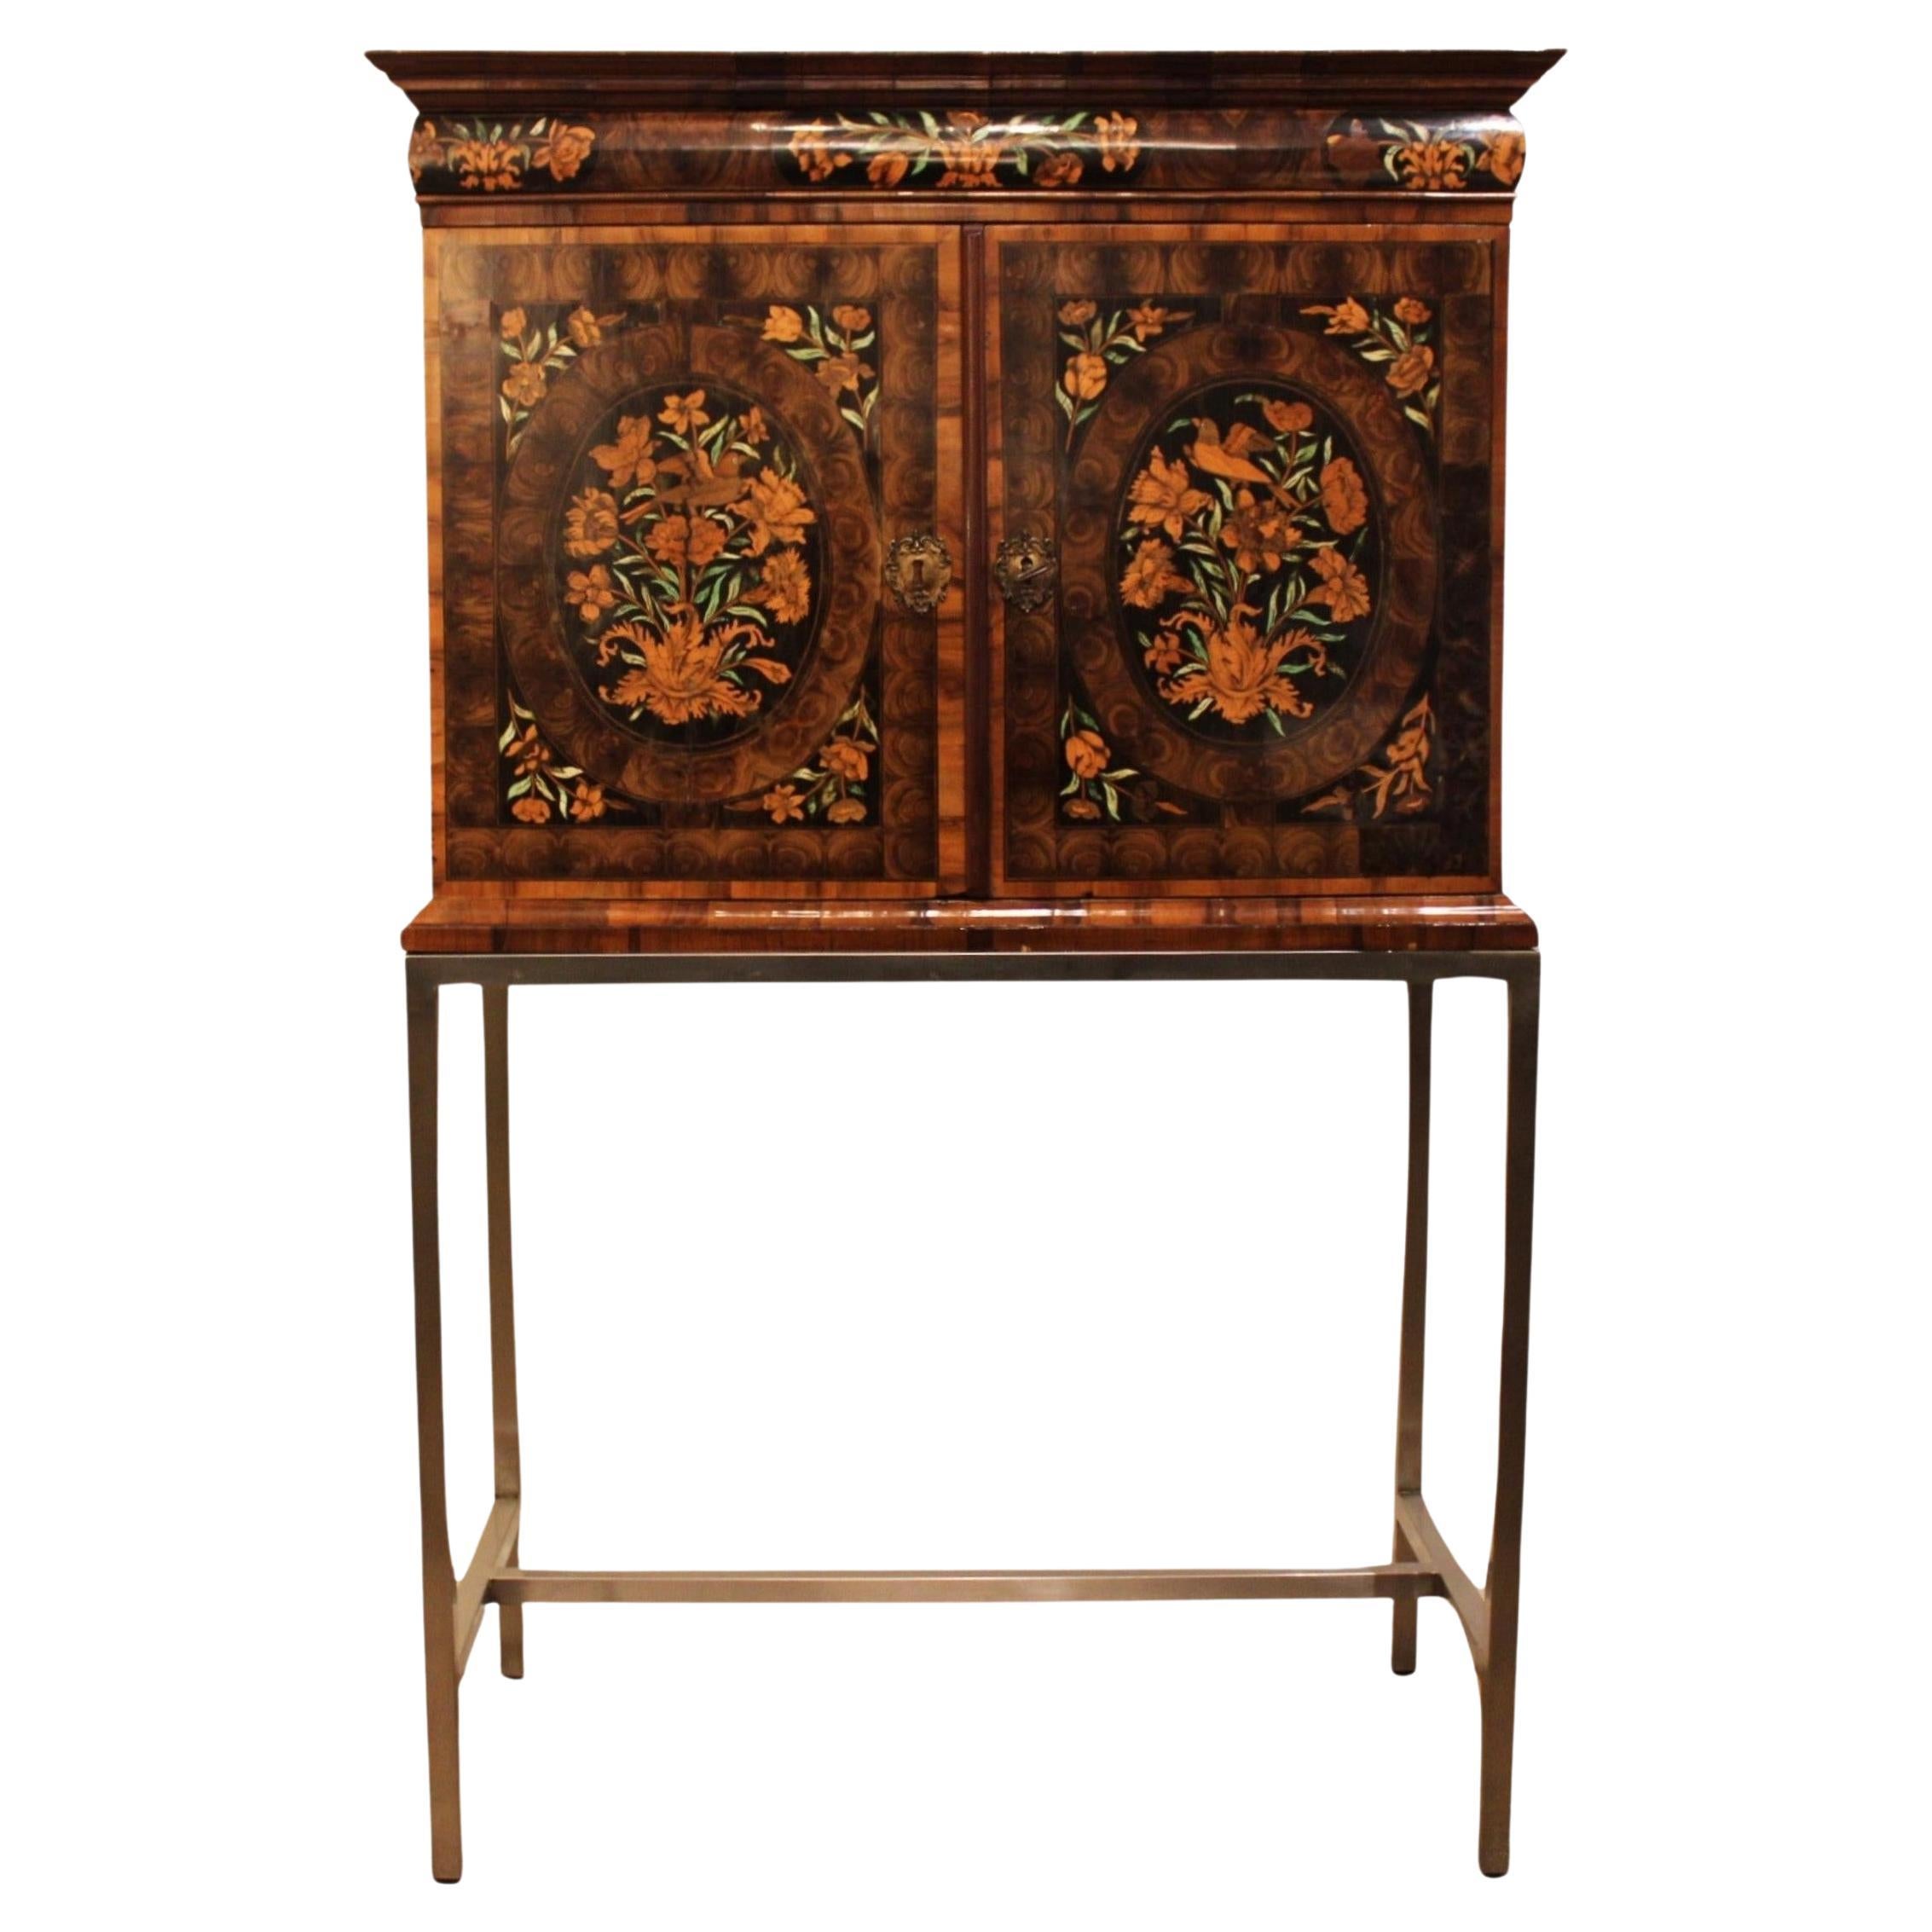 Marquetry cabinet, late 18th century